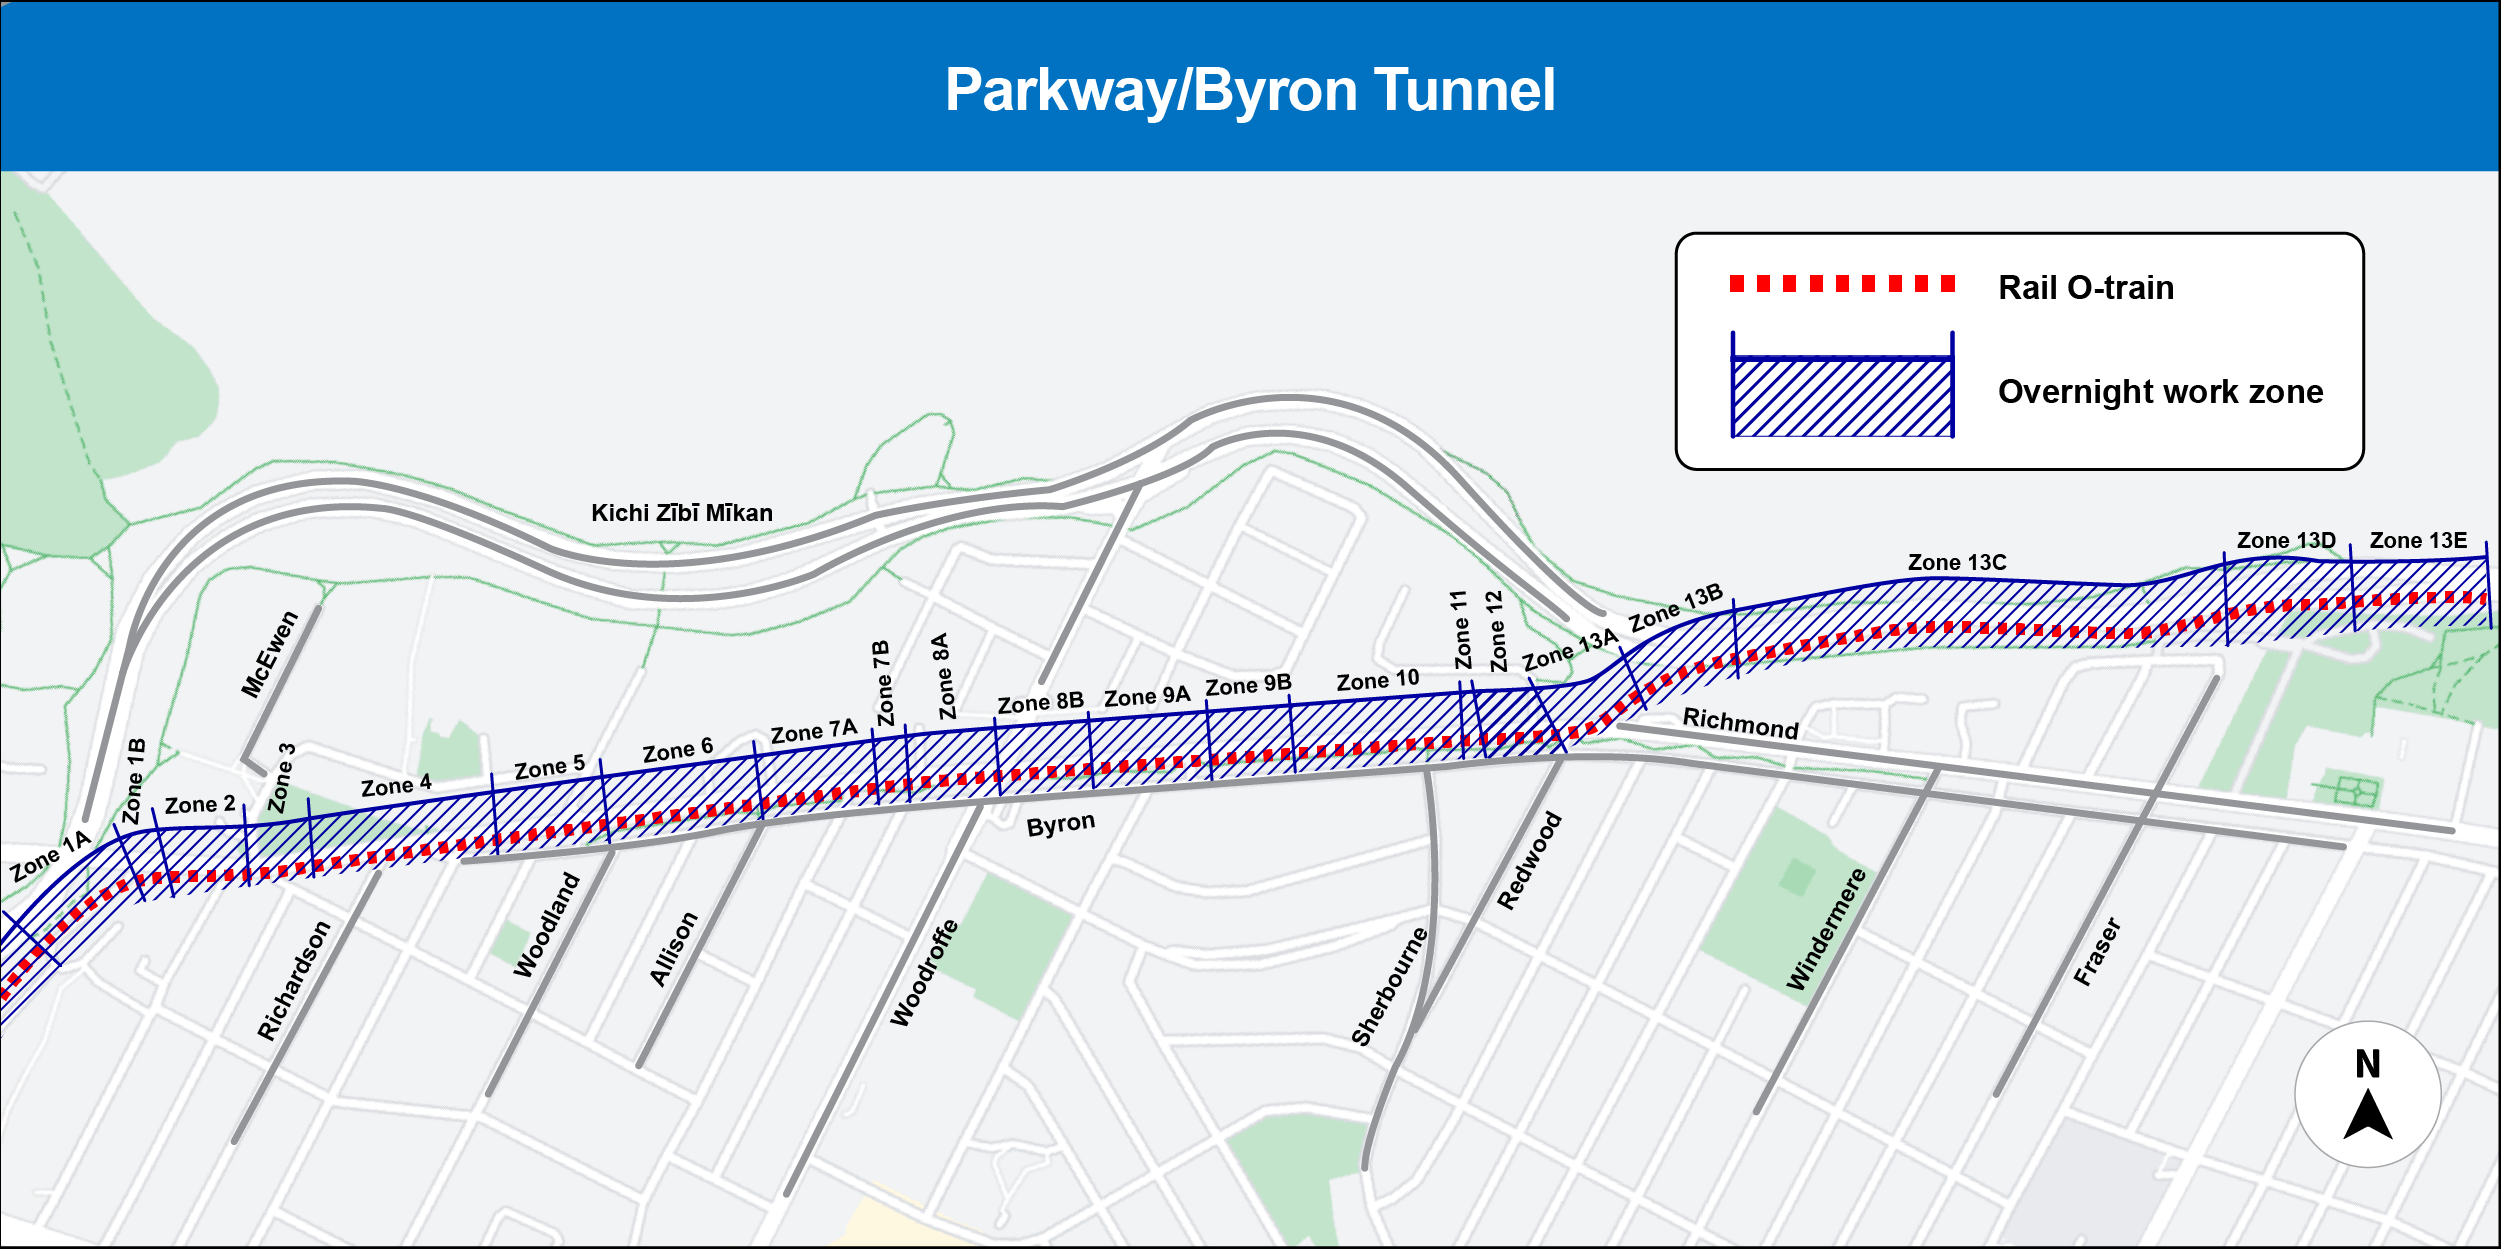 Map depicting nightwork on the Cut and Cover Tunnels along the Parkway and Byron cooridor.